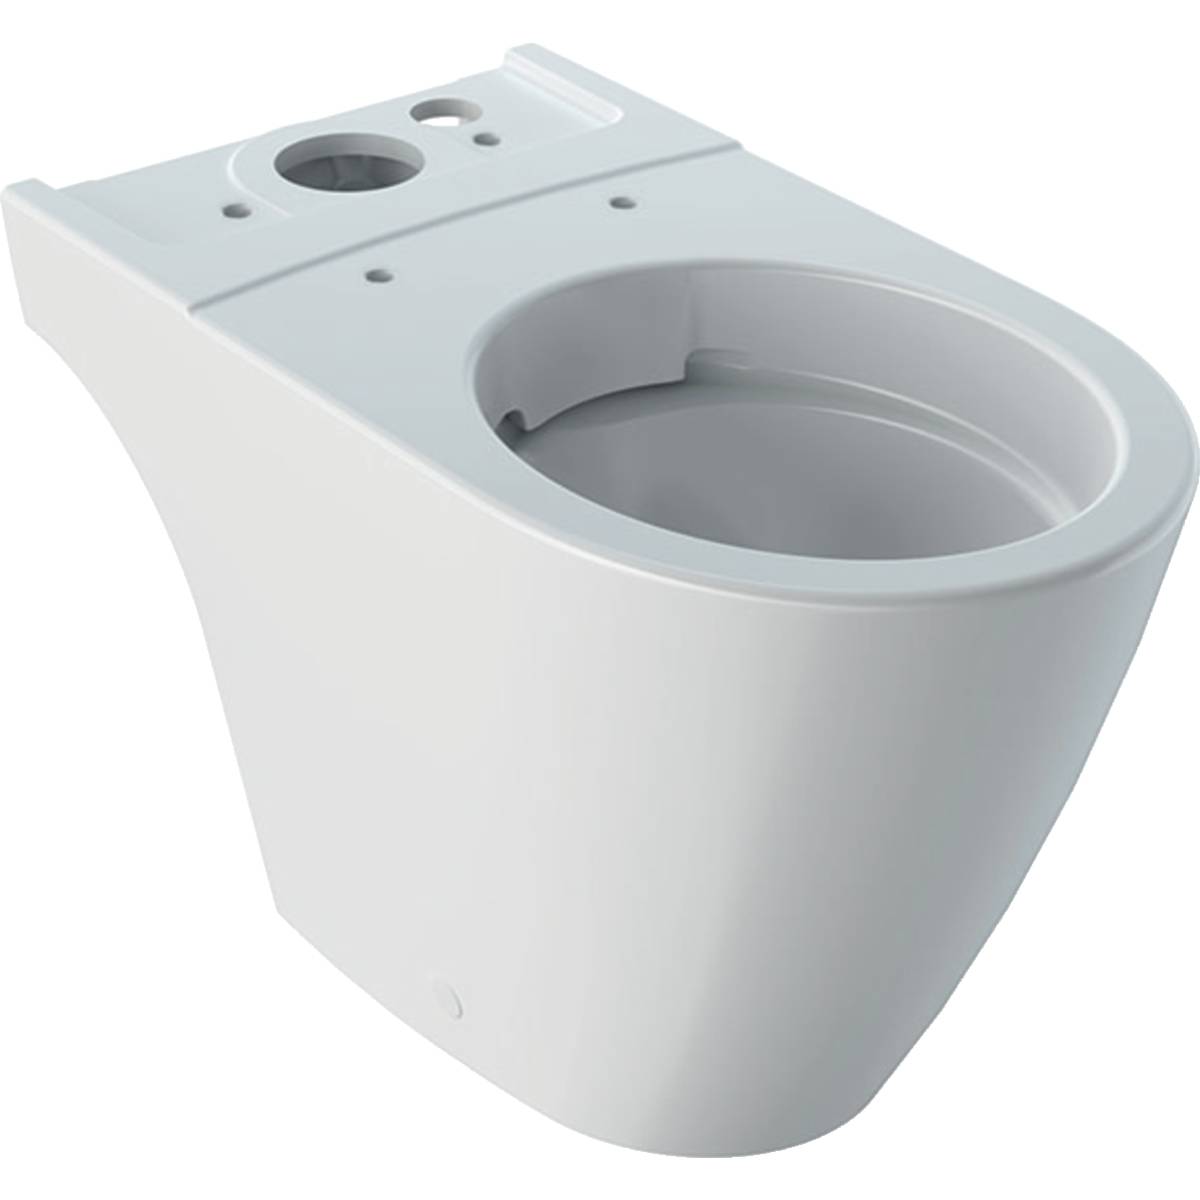 iCon Floor-Standing WC For Close-Coupled Exposed Cistern, Washdown, Shrouded, Rimfree